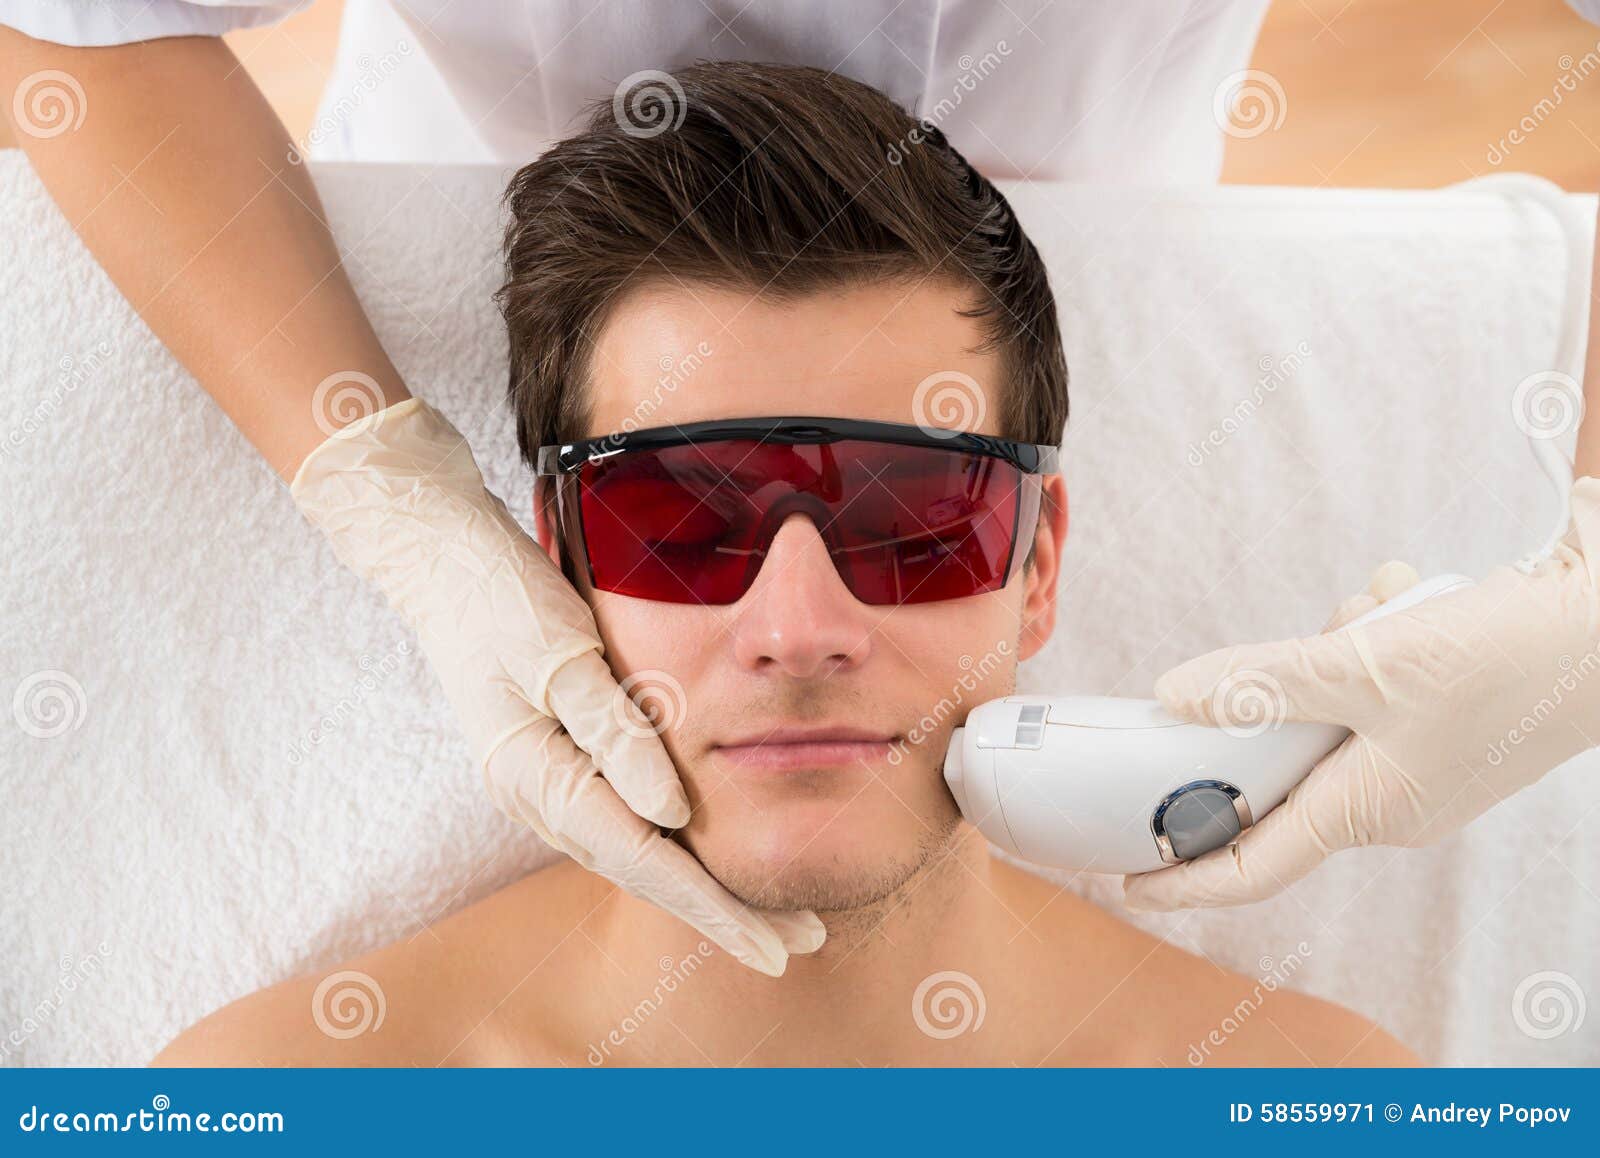 beautician giving laser epilation treatment to man face